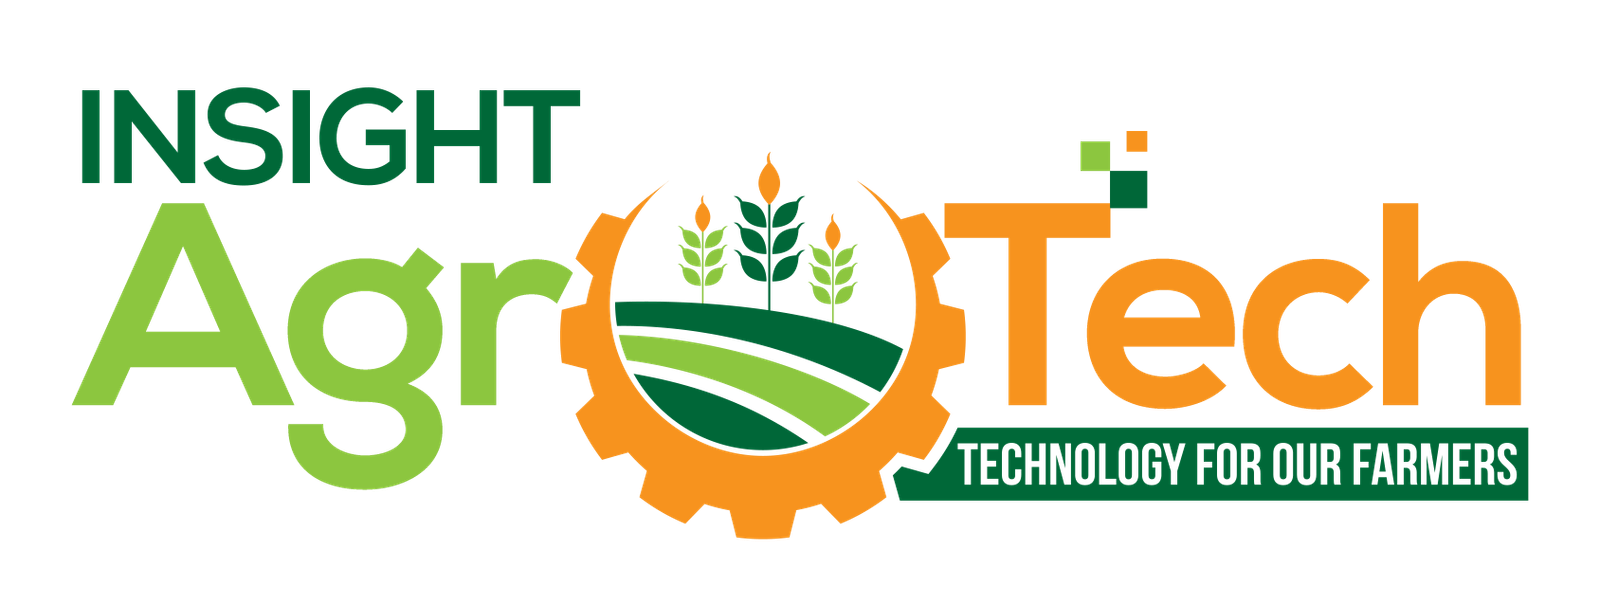 Insight Agrotech